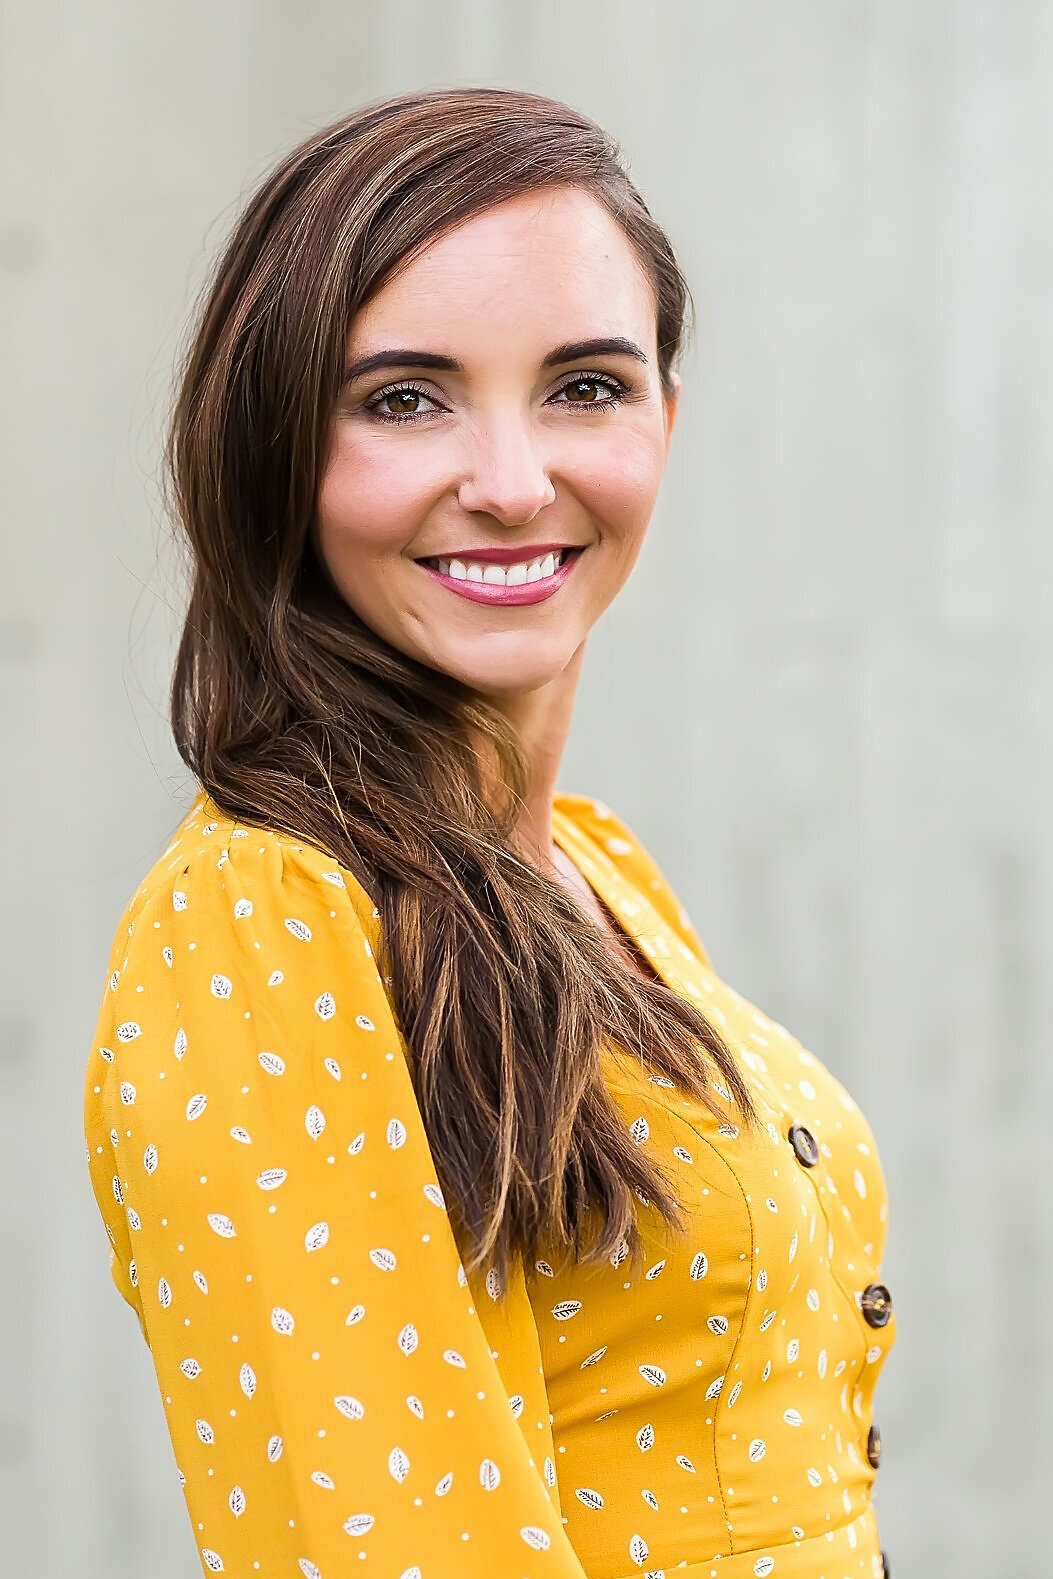 Woman in thirties wearing yellow and posing for headshot in front of a cement wall